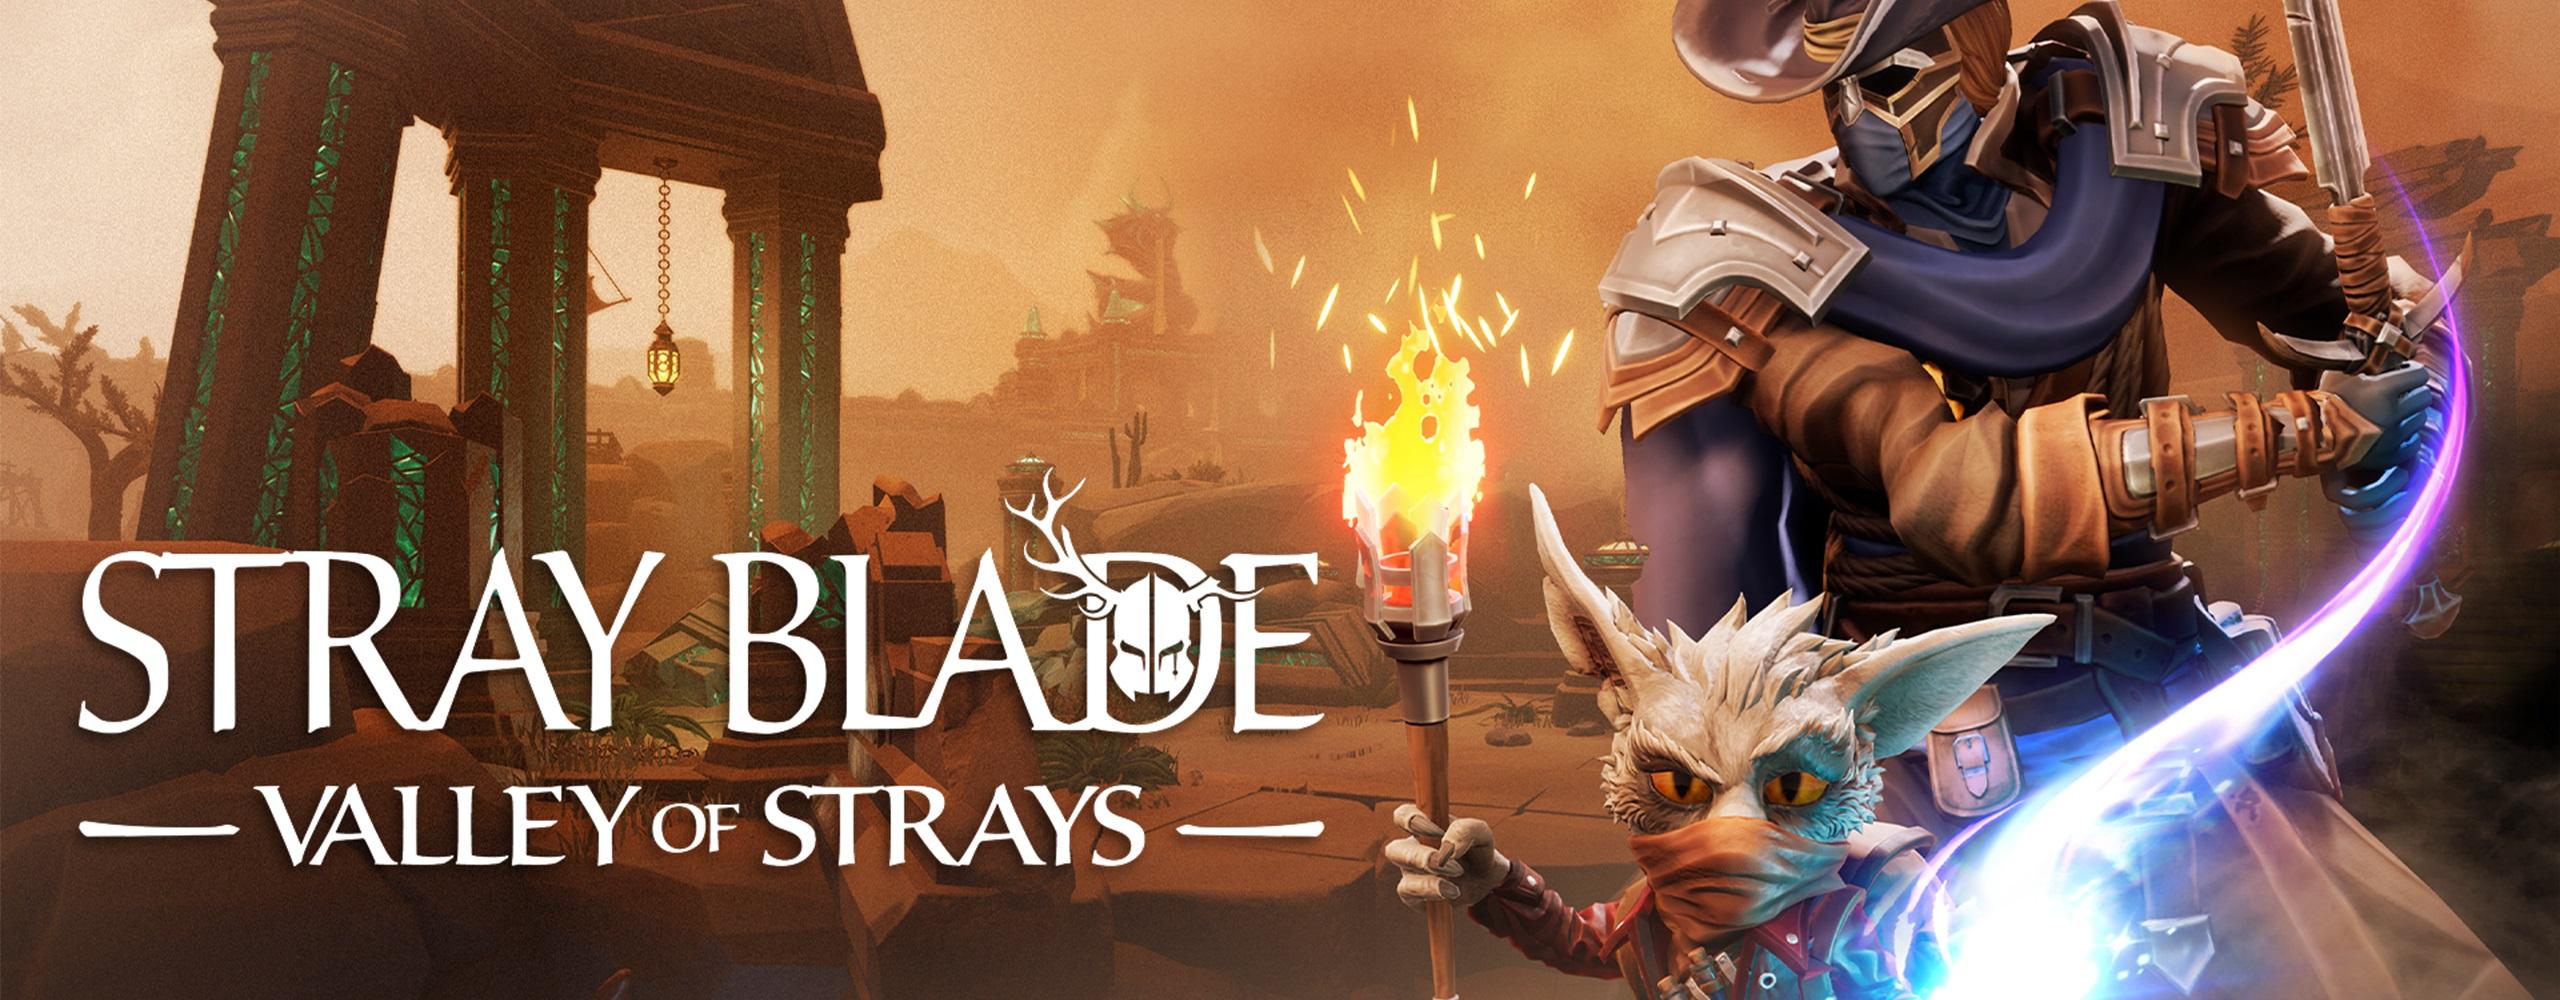 Stray Blade: Valley of Strays Story Expansion + New Update!